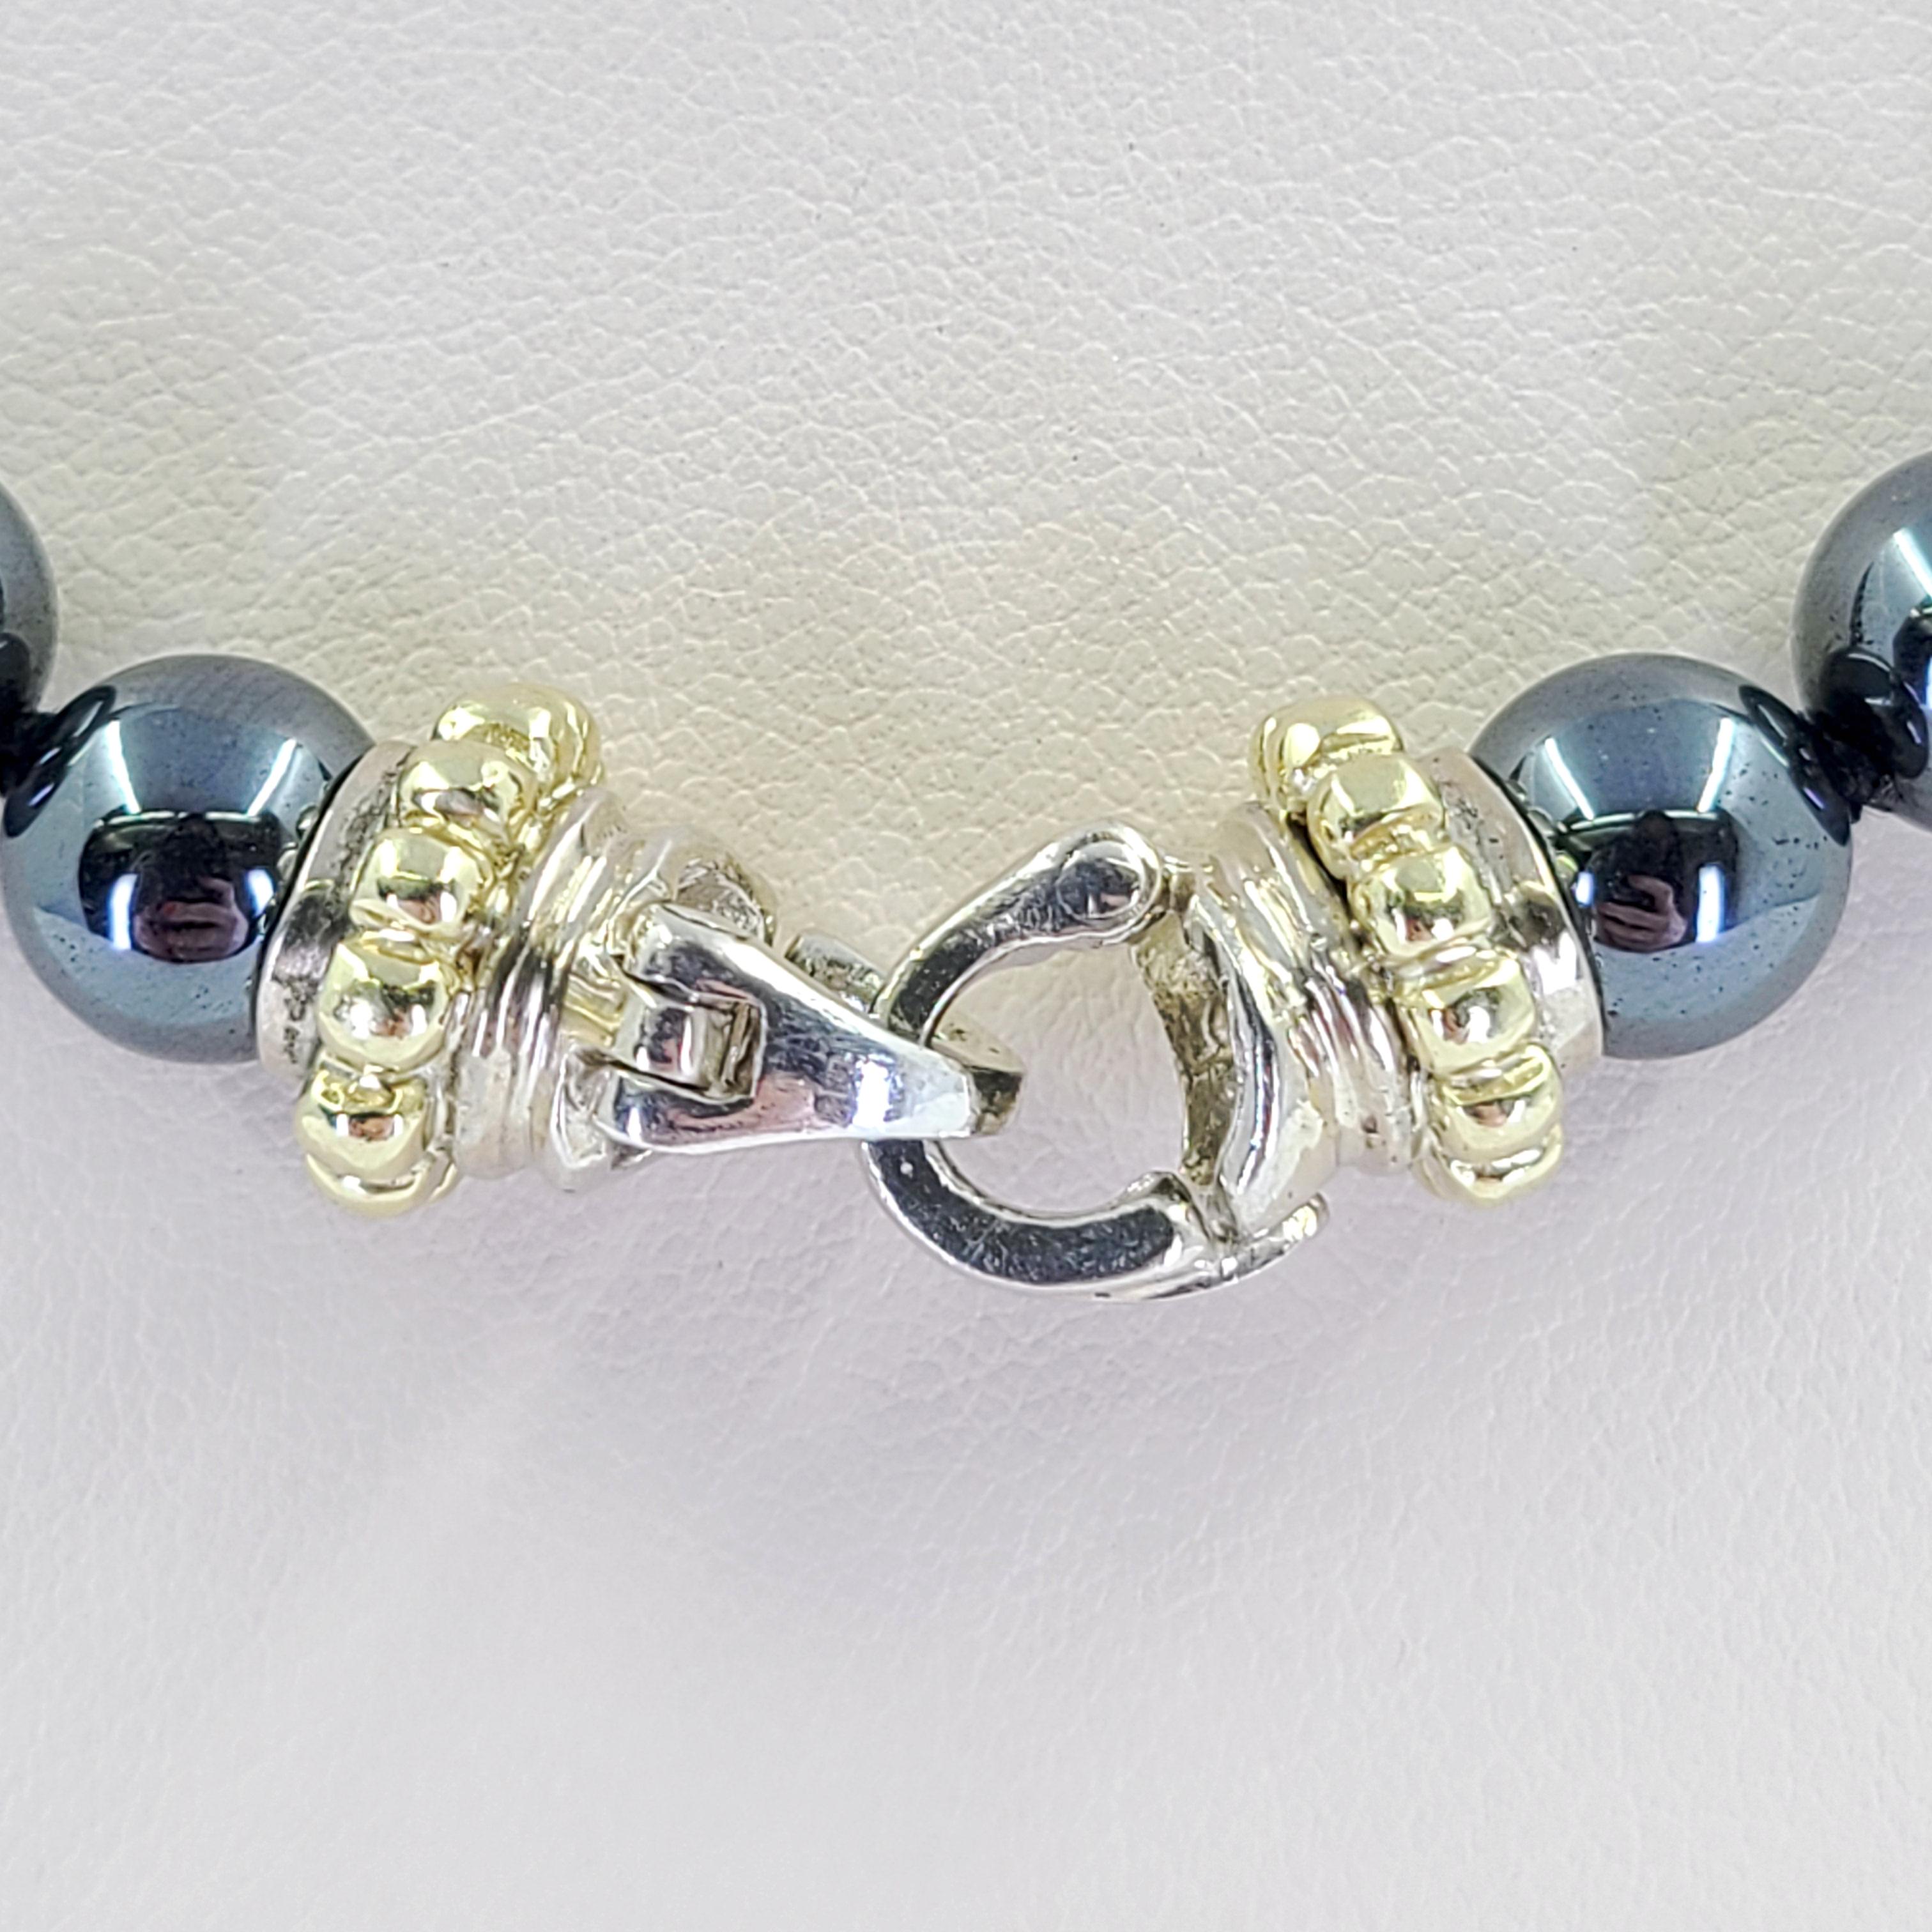 8mm Hematite Bead Necklace Measuring 16 Inches Long Featuring Sterling Silver Clasp With 9 Karat Yellow Gold Accents. Each End Opens And Closes, So You Can Change Out Multiple Pendants.